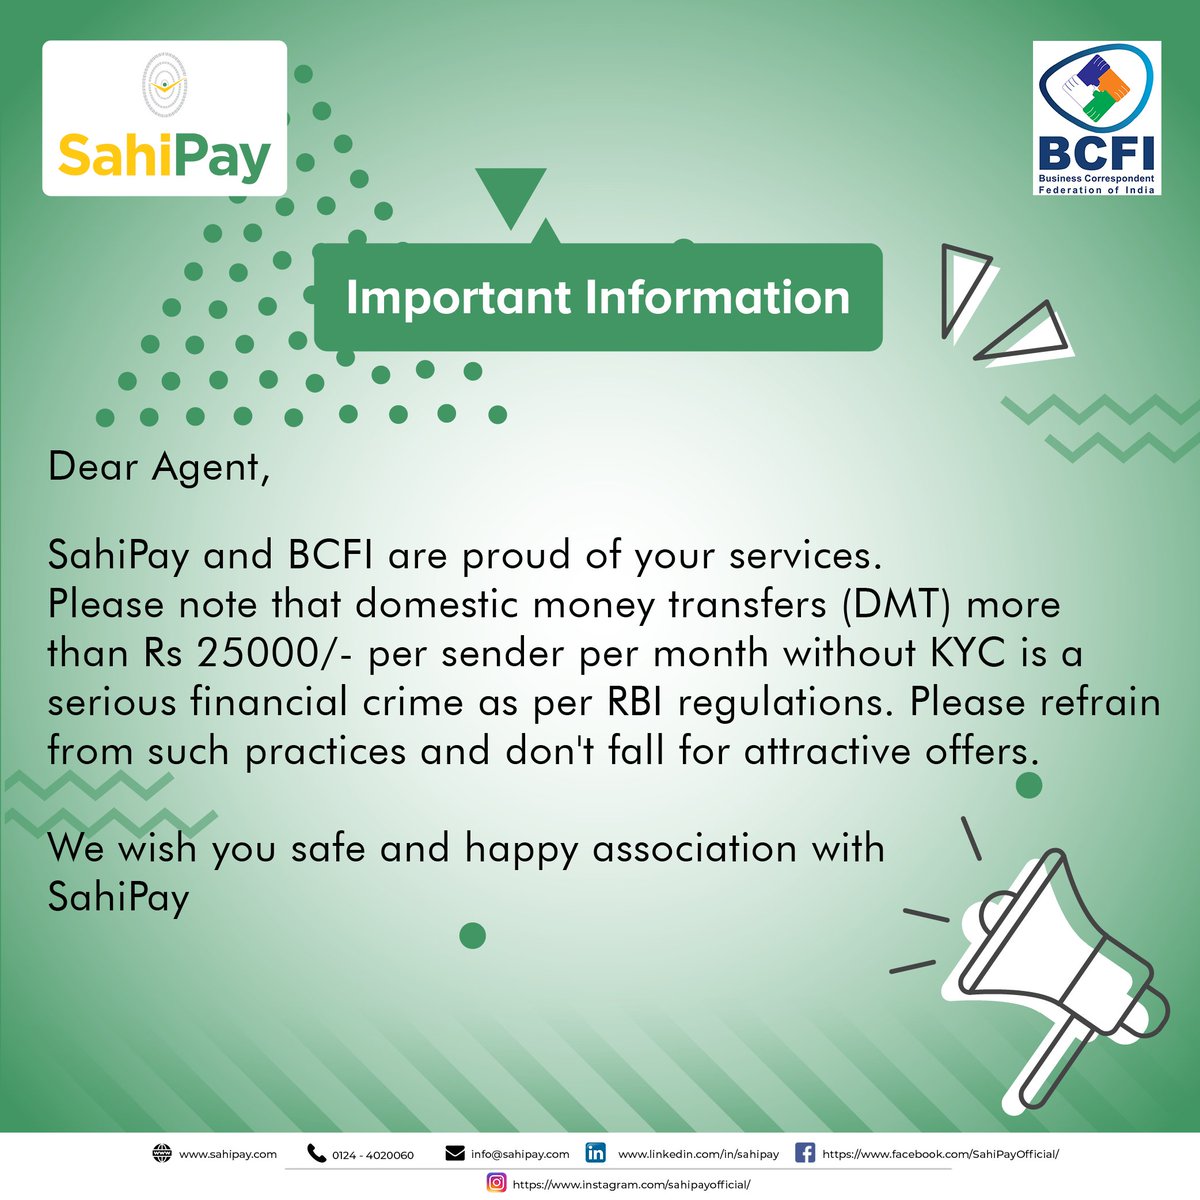 As per RBI guidelines, DMT without KYC of more than 25000/- per sender per month is a financial crime. Do safe and secured payment with #sahipay.
#absahipaykaregaindia #integrated #platform #finacialservices #banking #payments #domesticmoneytransfer #digital #aeps #fintech